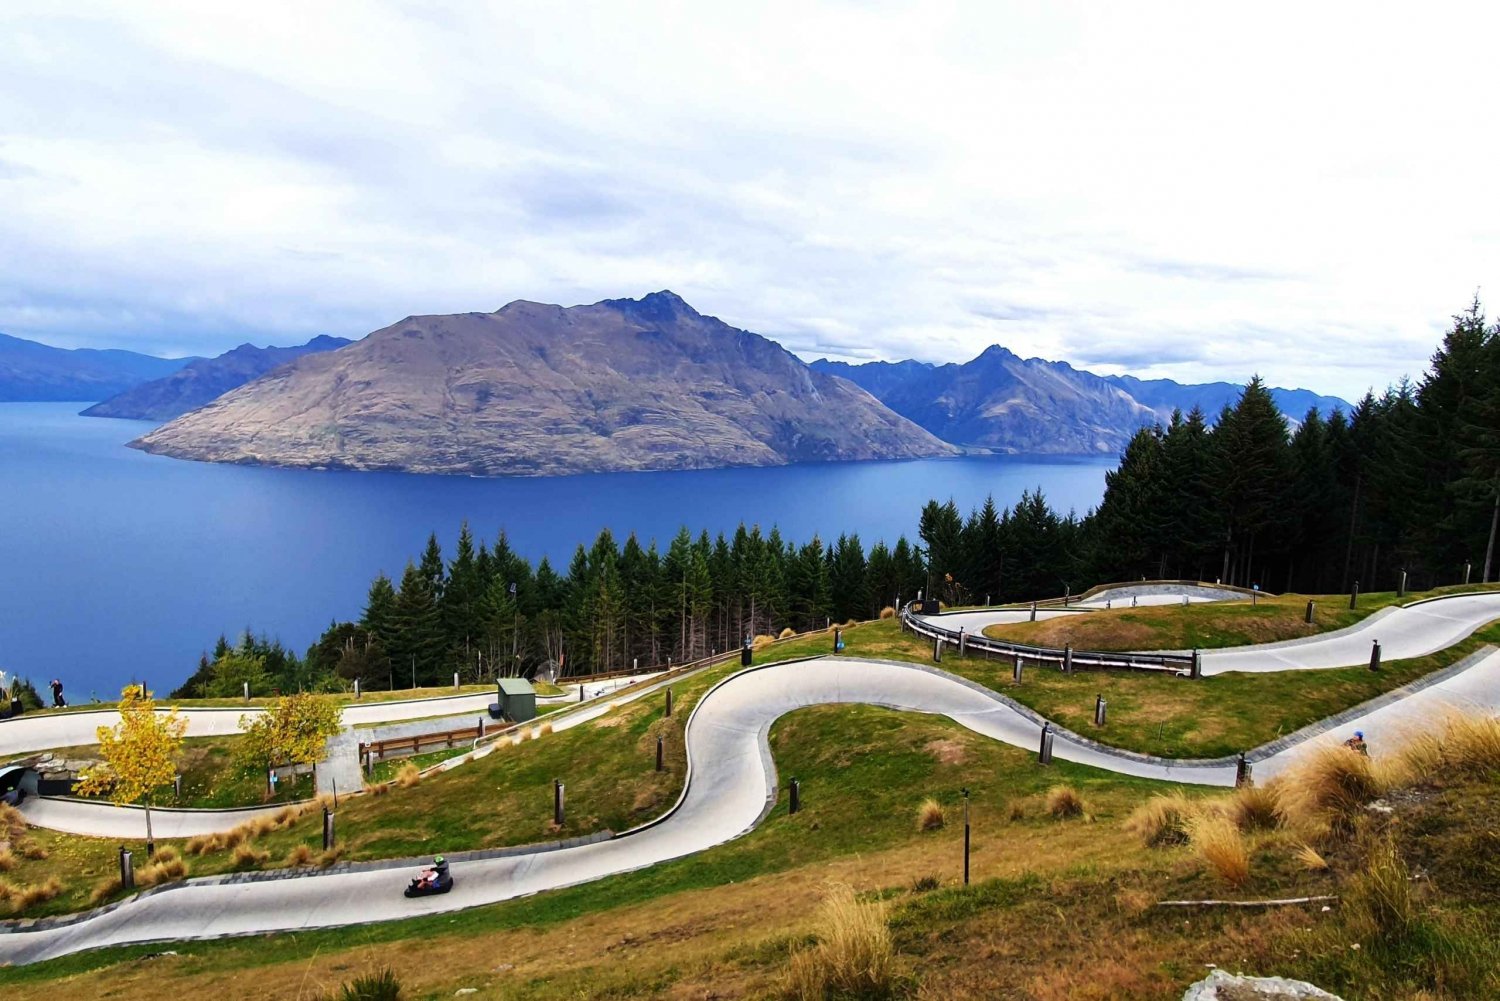 6 Day South Island NZ Private Tour from Auckland